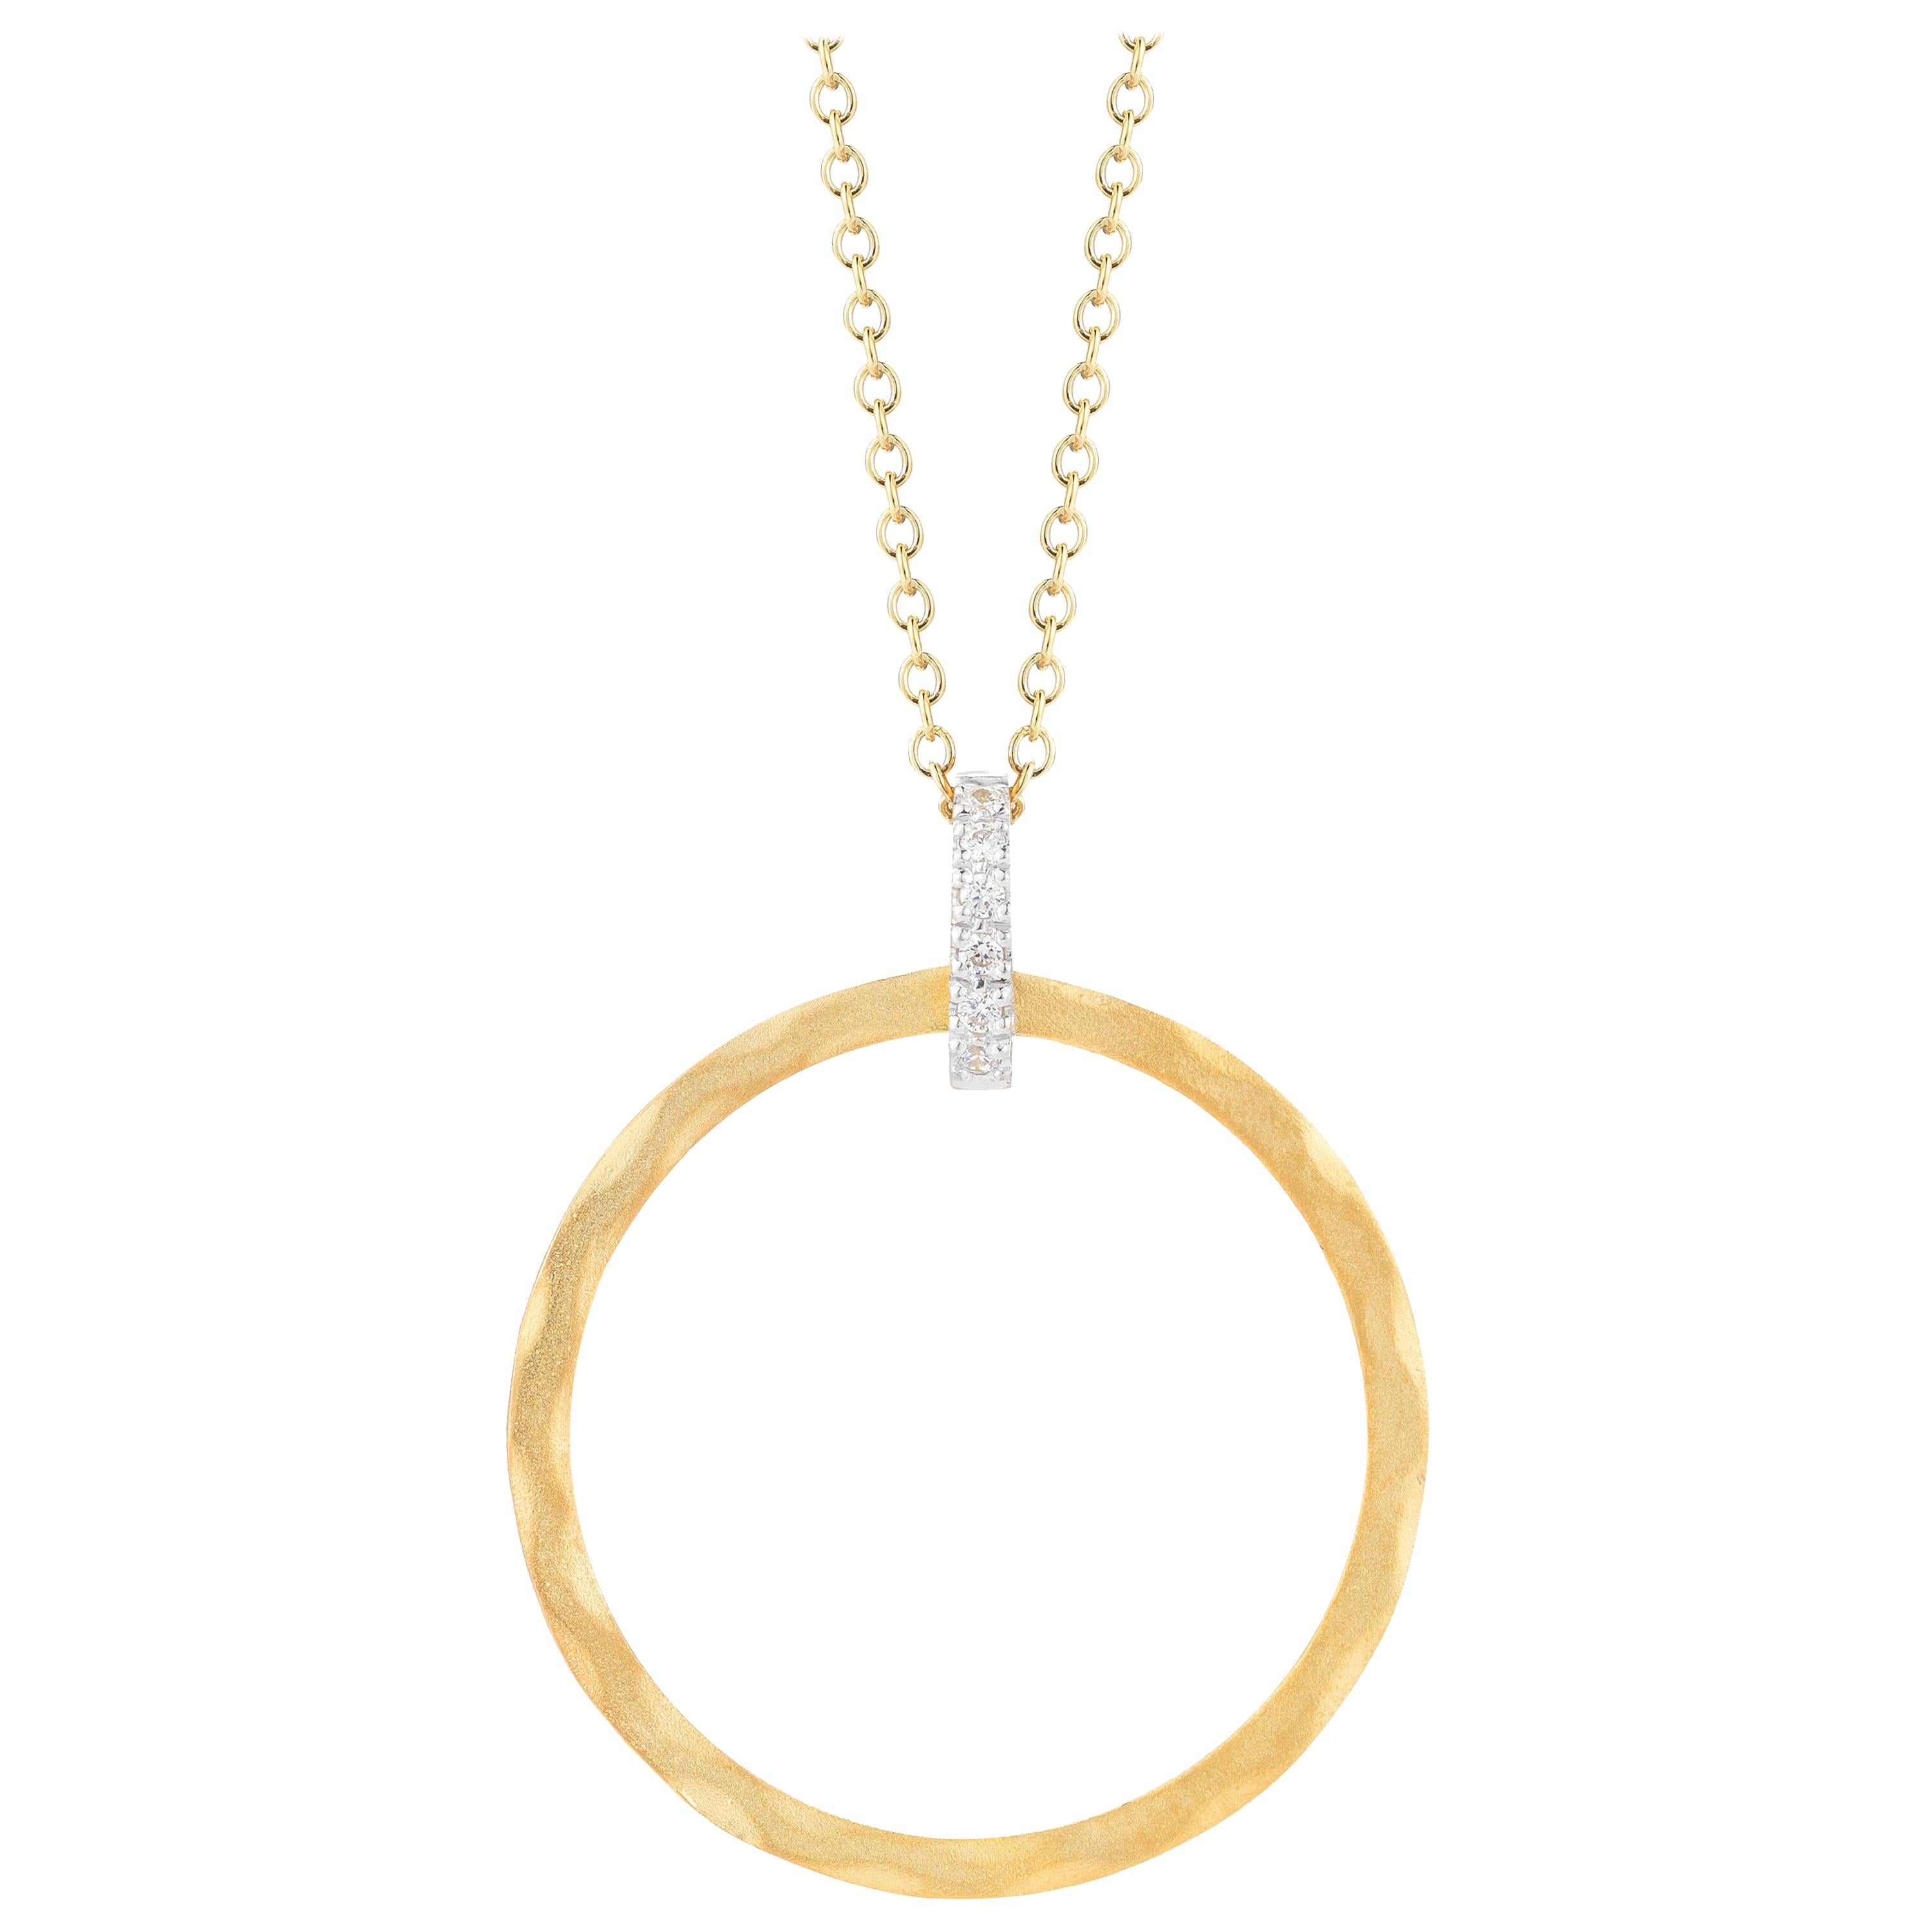 Handcrafted 14 Karat Yellow Gold Hammered Open Circle Pendant For Sale